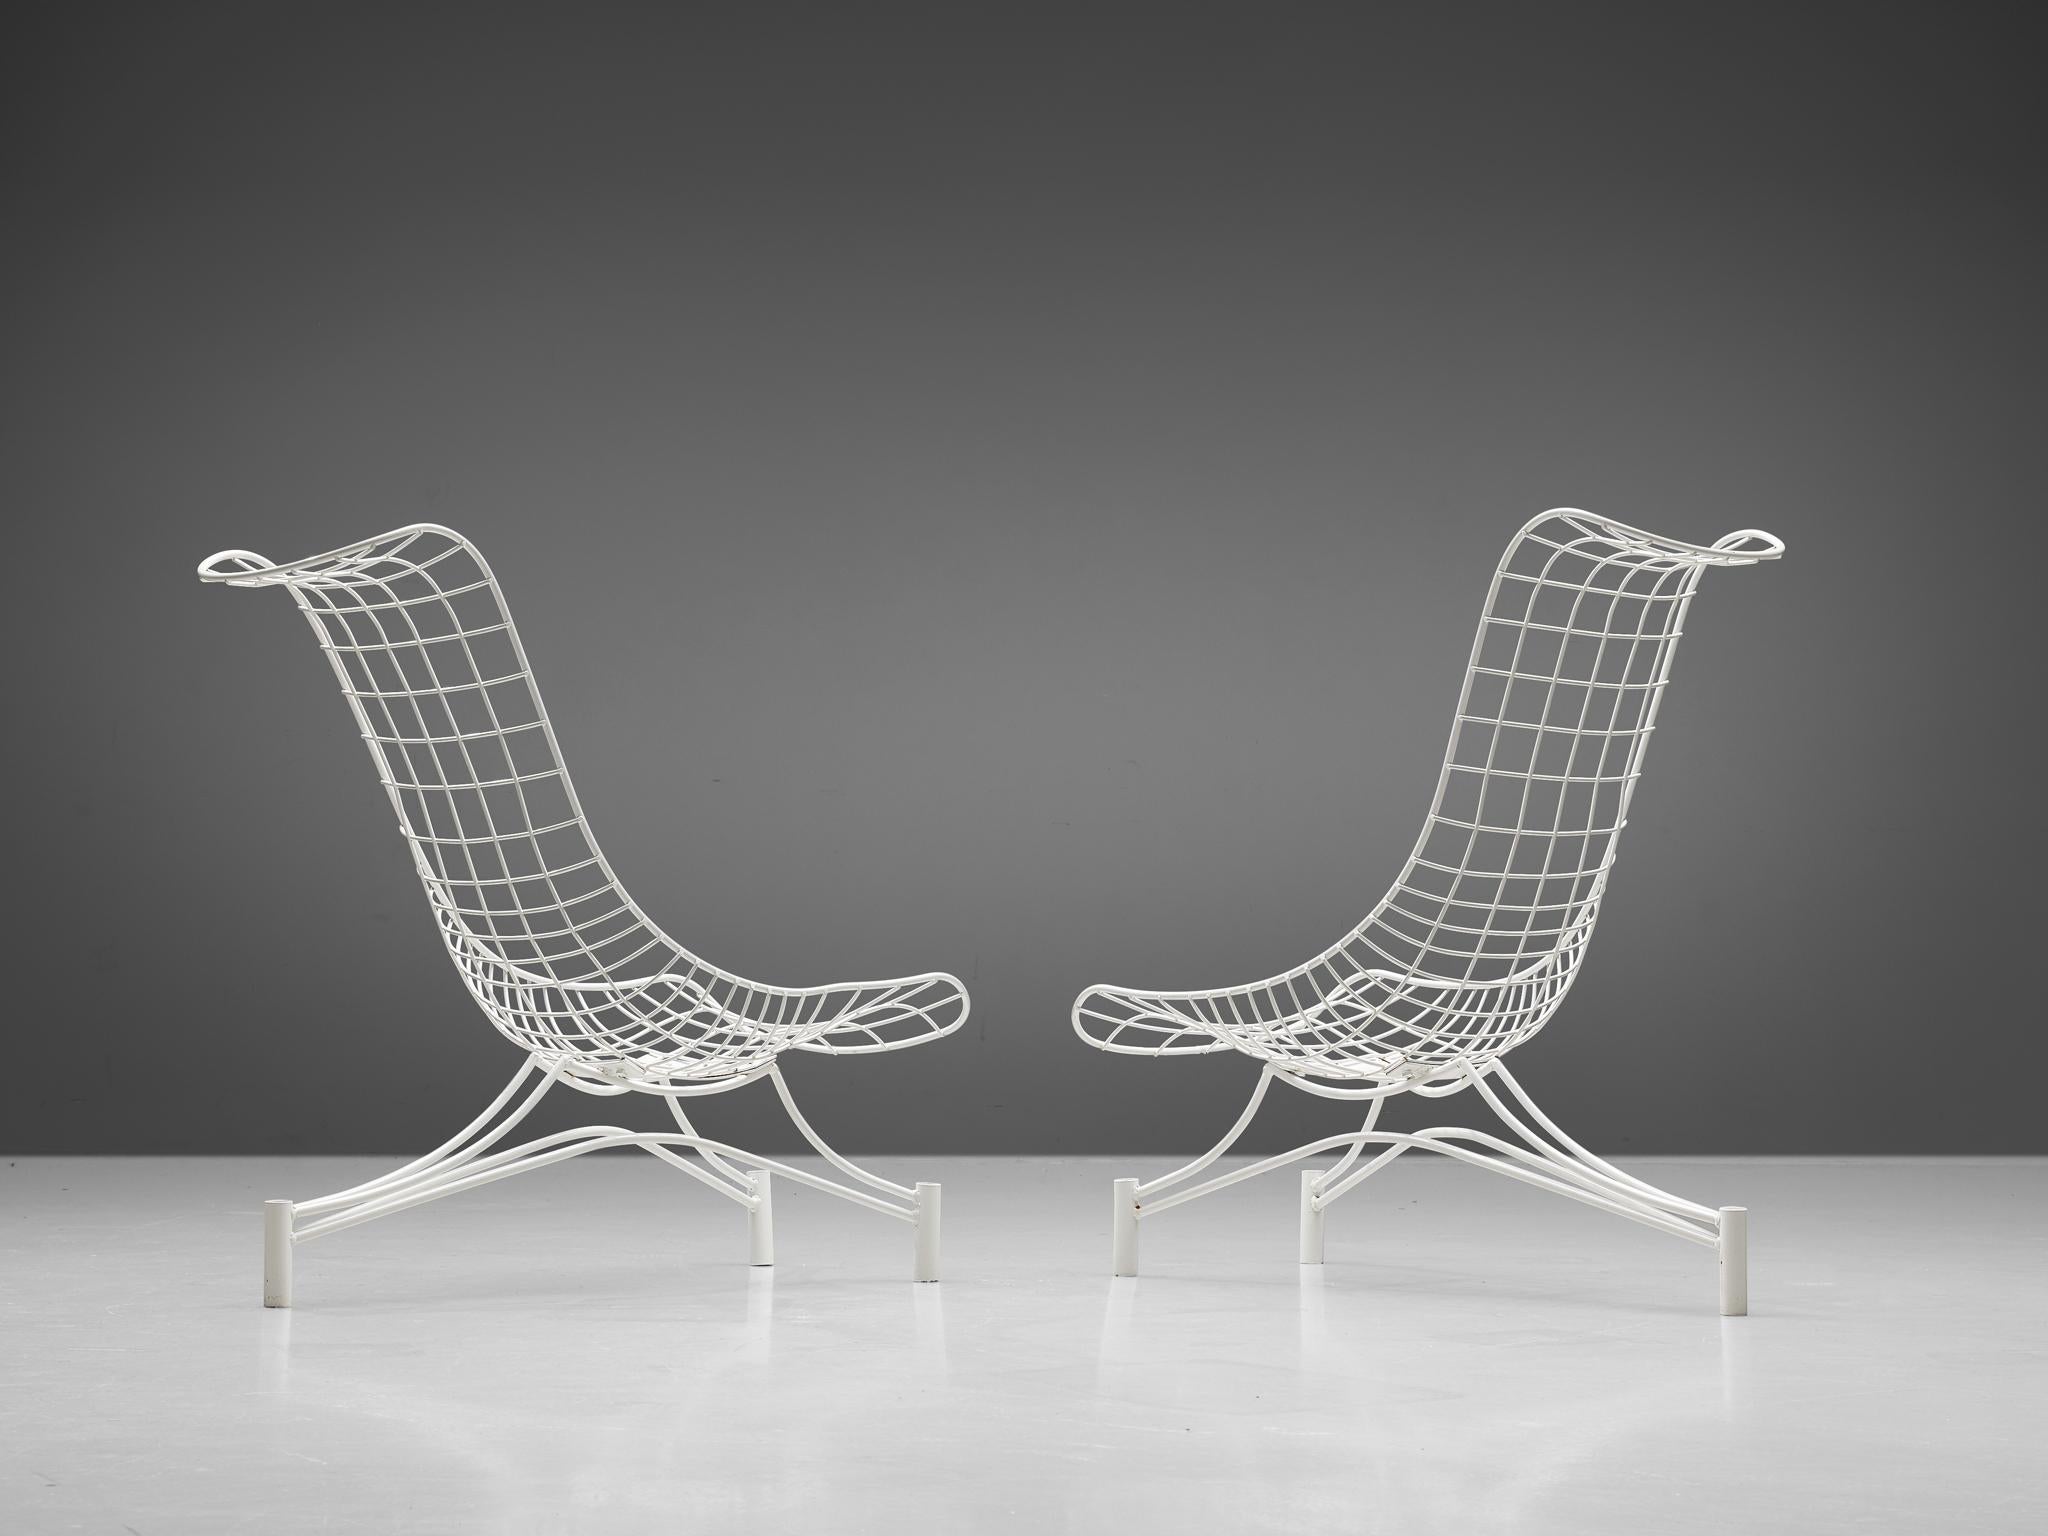 Vladimir Kagan, pair of 'Capricorn' lounge chairs, lacquered metal, United States, circa. 1958

The ‘Capricorn’ chair epitomizes a splendid construction that is suitable for indoor and outdoor, making it a dynamic and easily adaptable chair. The